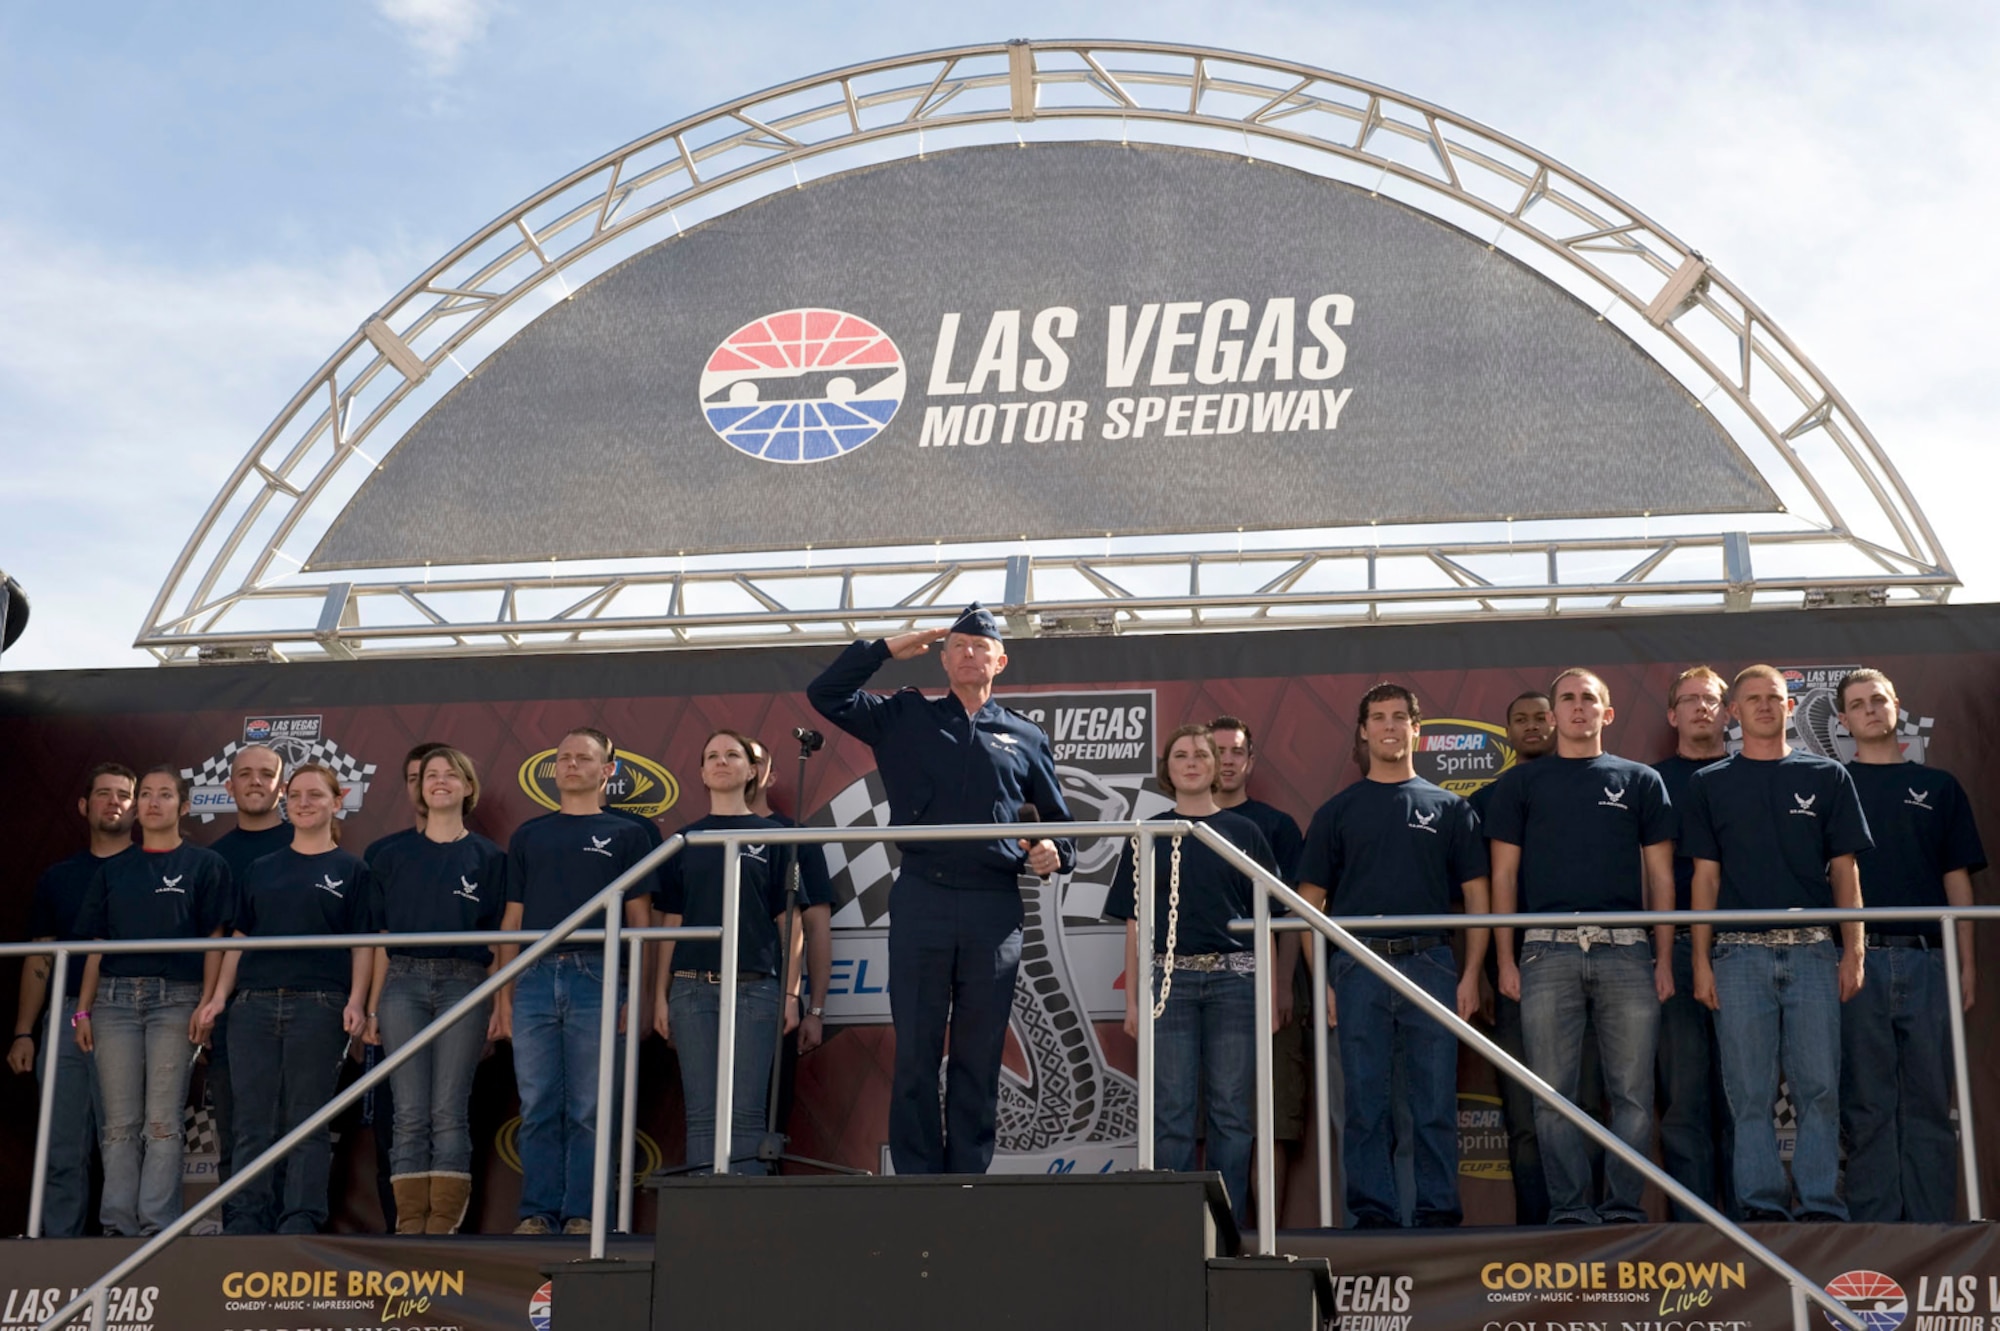 Lt. Gen. Ronald F. Sams salutes race fans attending the Shelby 427 race after administering the oath of enlistment to 19 Air Force recruits March 1 at Las Vegas Motor Speedway in Nevada. The recruits are part of the delayed enlistment program from the Las Vegas area. General Sams is the Air Force inspector general. (U.S. Air Force photo/Master Sgt. Jack Braden)